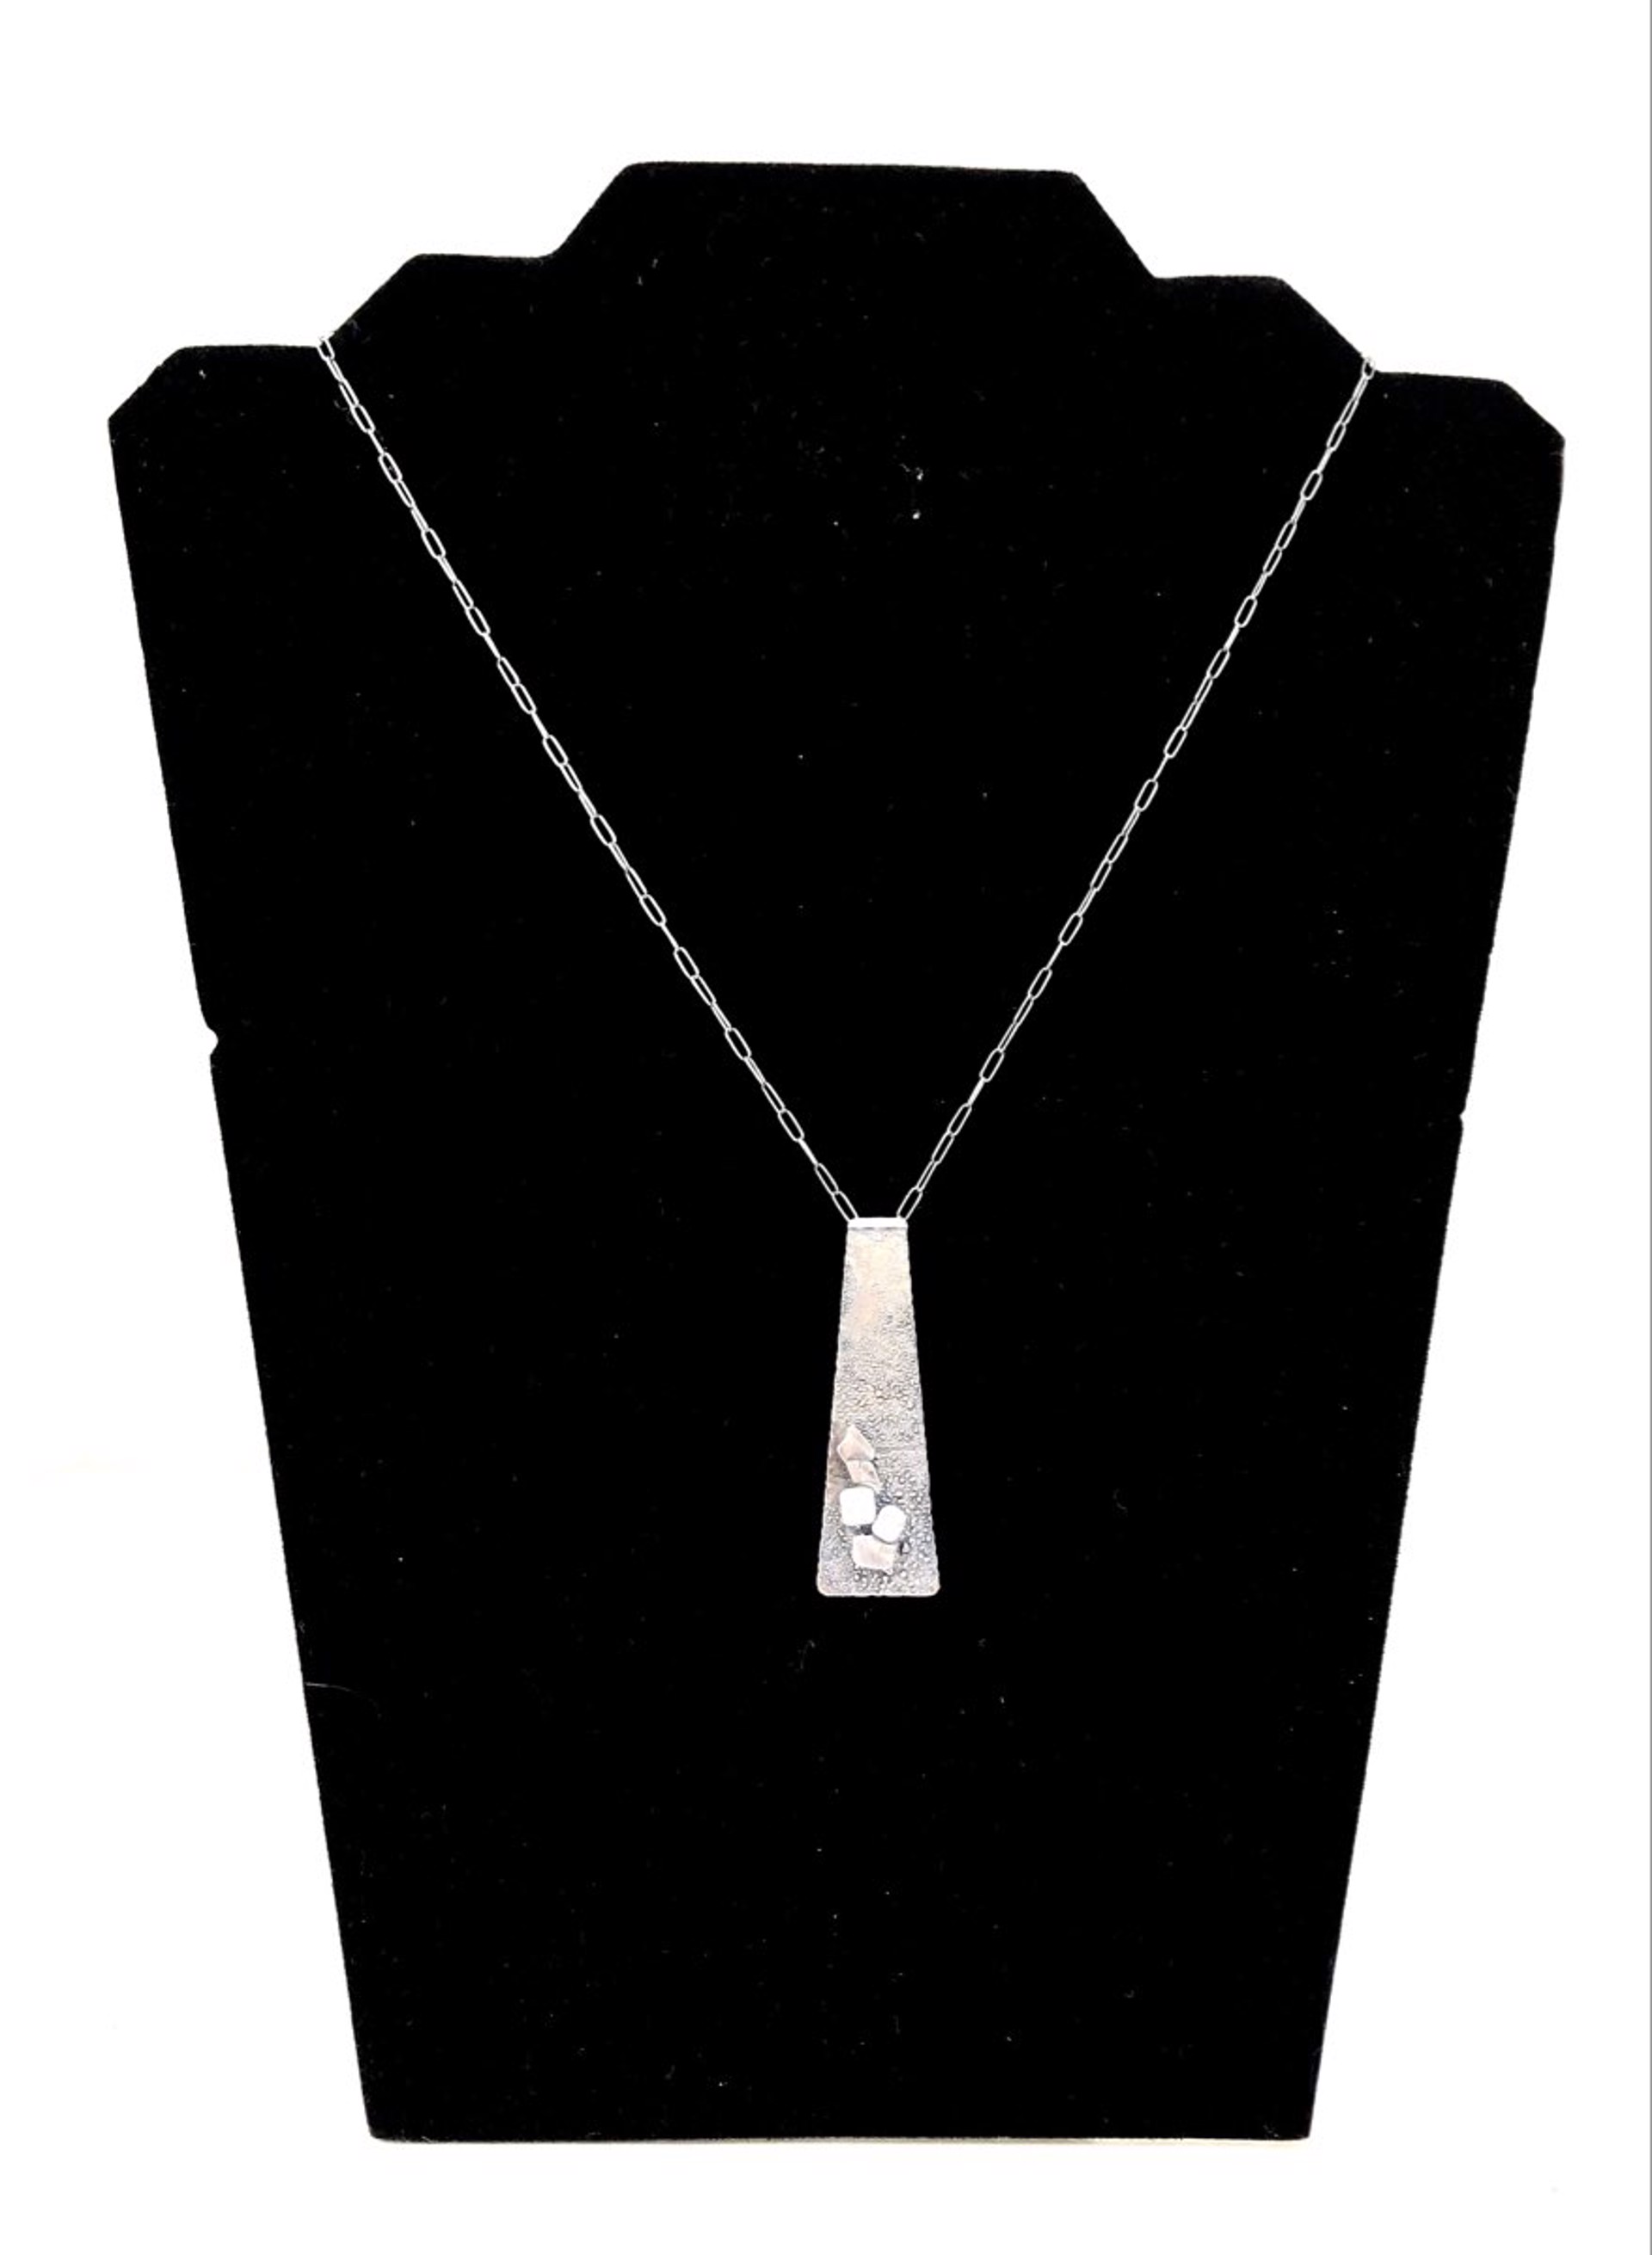 Tension Cluster Pendant in Silver Squares by Theresa St. Romain